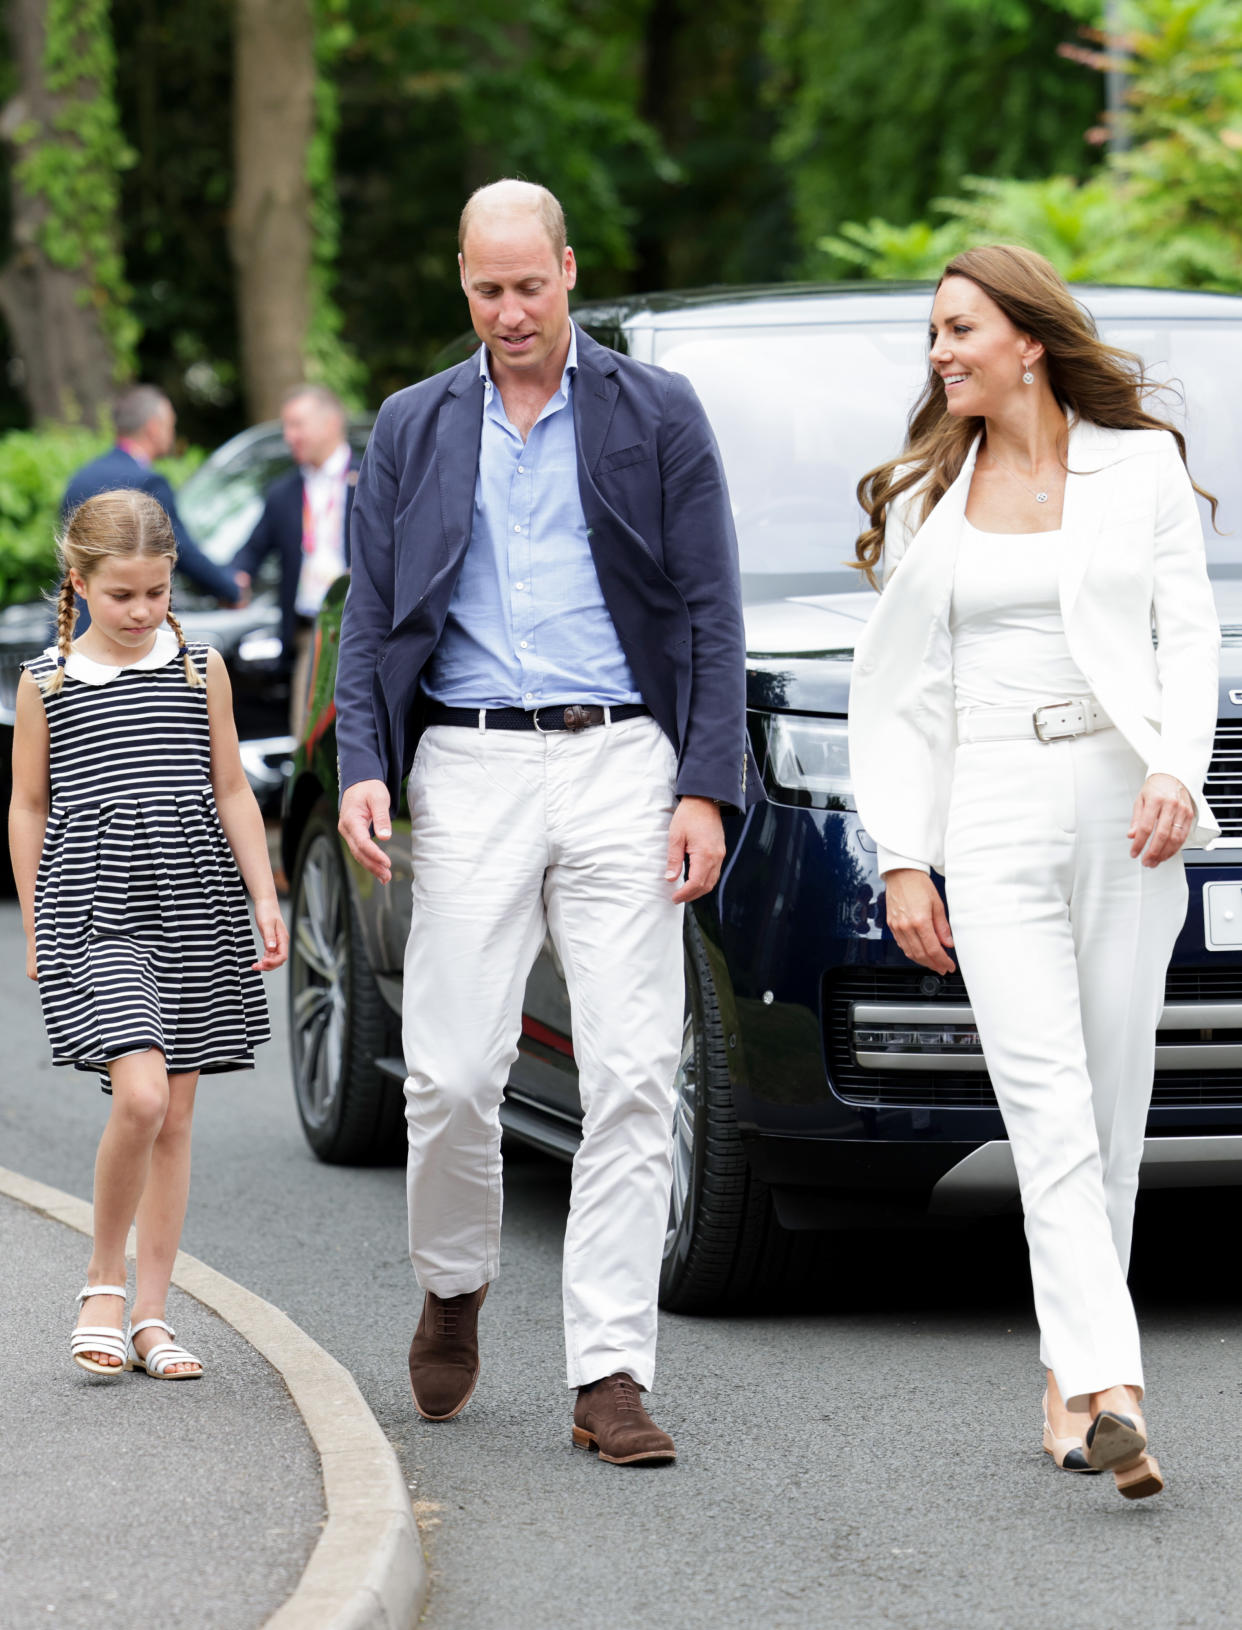 BIRMINGHAM, ENGLAND - AUGUST 02: Prince William, Duke of Cambridge, Princess Charlotte of Cambridge and Catherine, Duchess of Cambridge arrive at SportsAid House during the 2022 Commonwealth Games on August 02, 2022 in Birmingham, England. The Duchess became the Patron of SportsAid in 2013, Team England Futures programme is a partnership between SportsAid, Sport England and Commonwealth Games England which will see around 1,000 talented young athletes and aspiring support staff given the opportunity to attend the Games and take a first-hand look behind-the-scenes. (Photo by Chris Jackson - Pool/Getty Images)